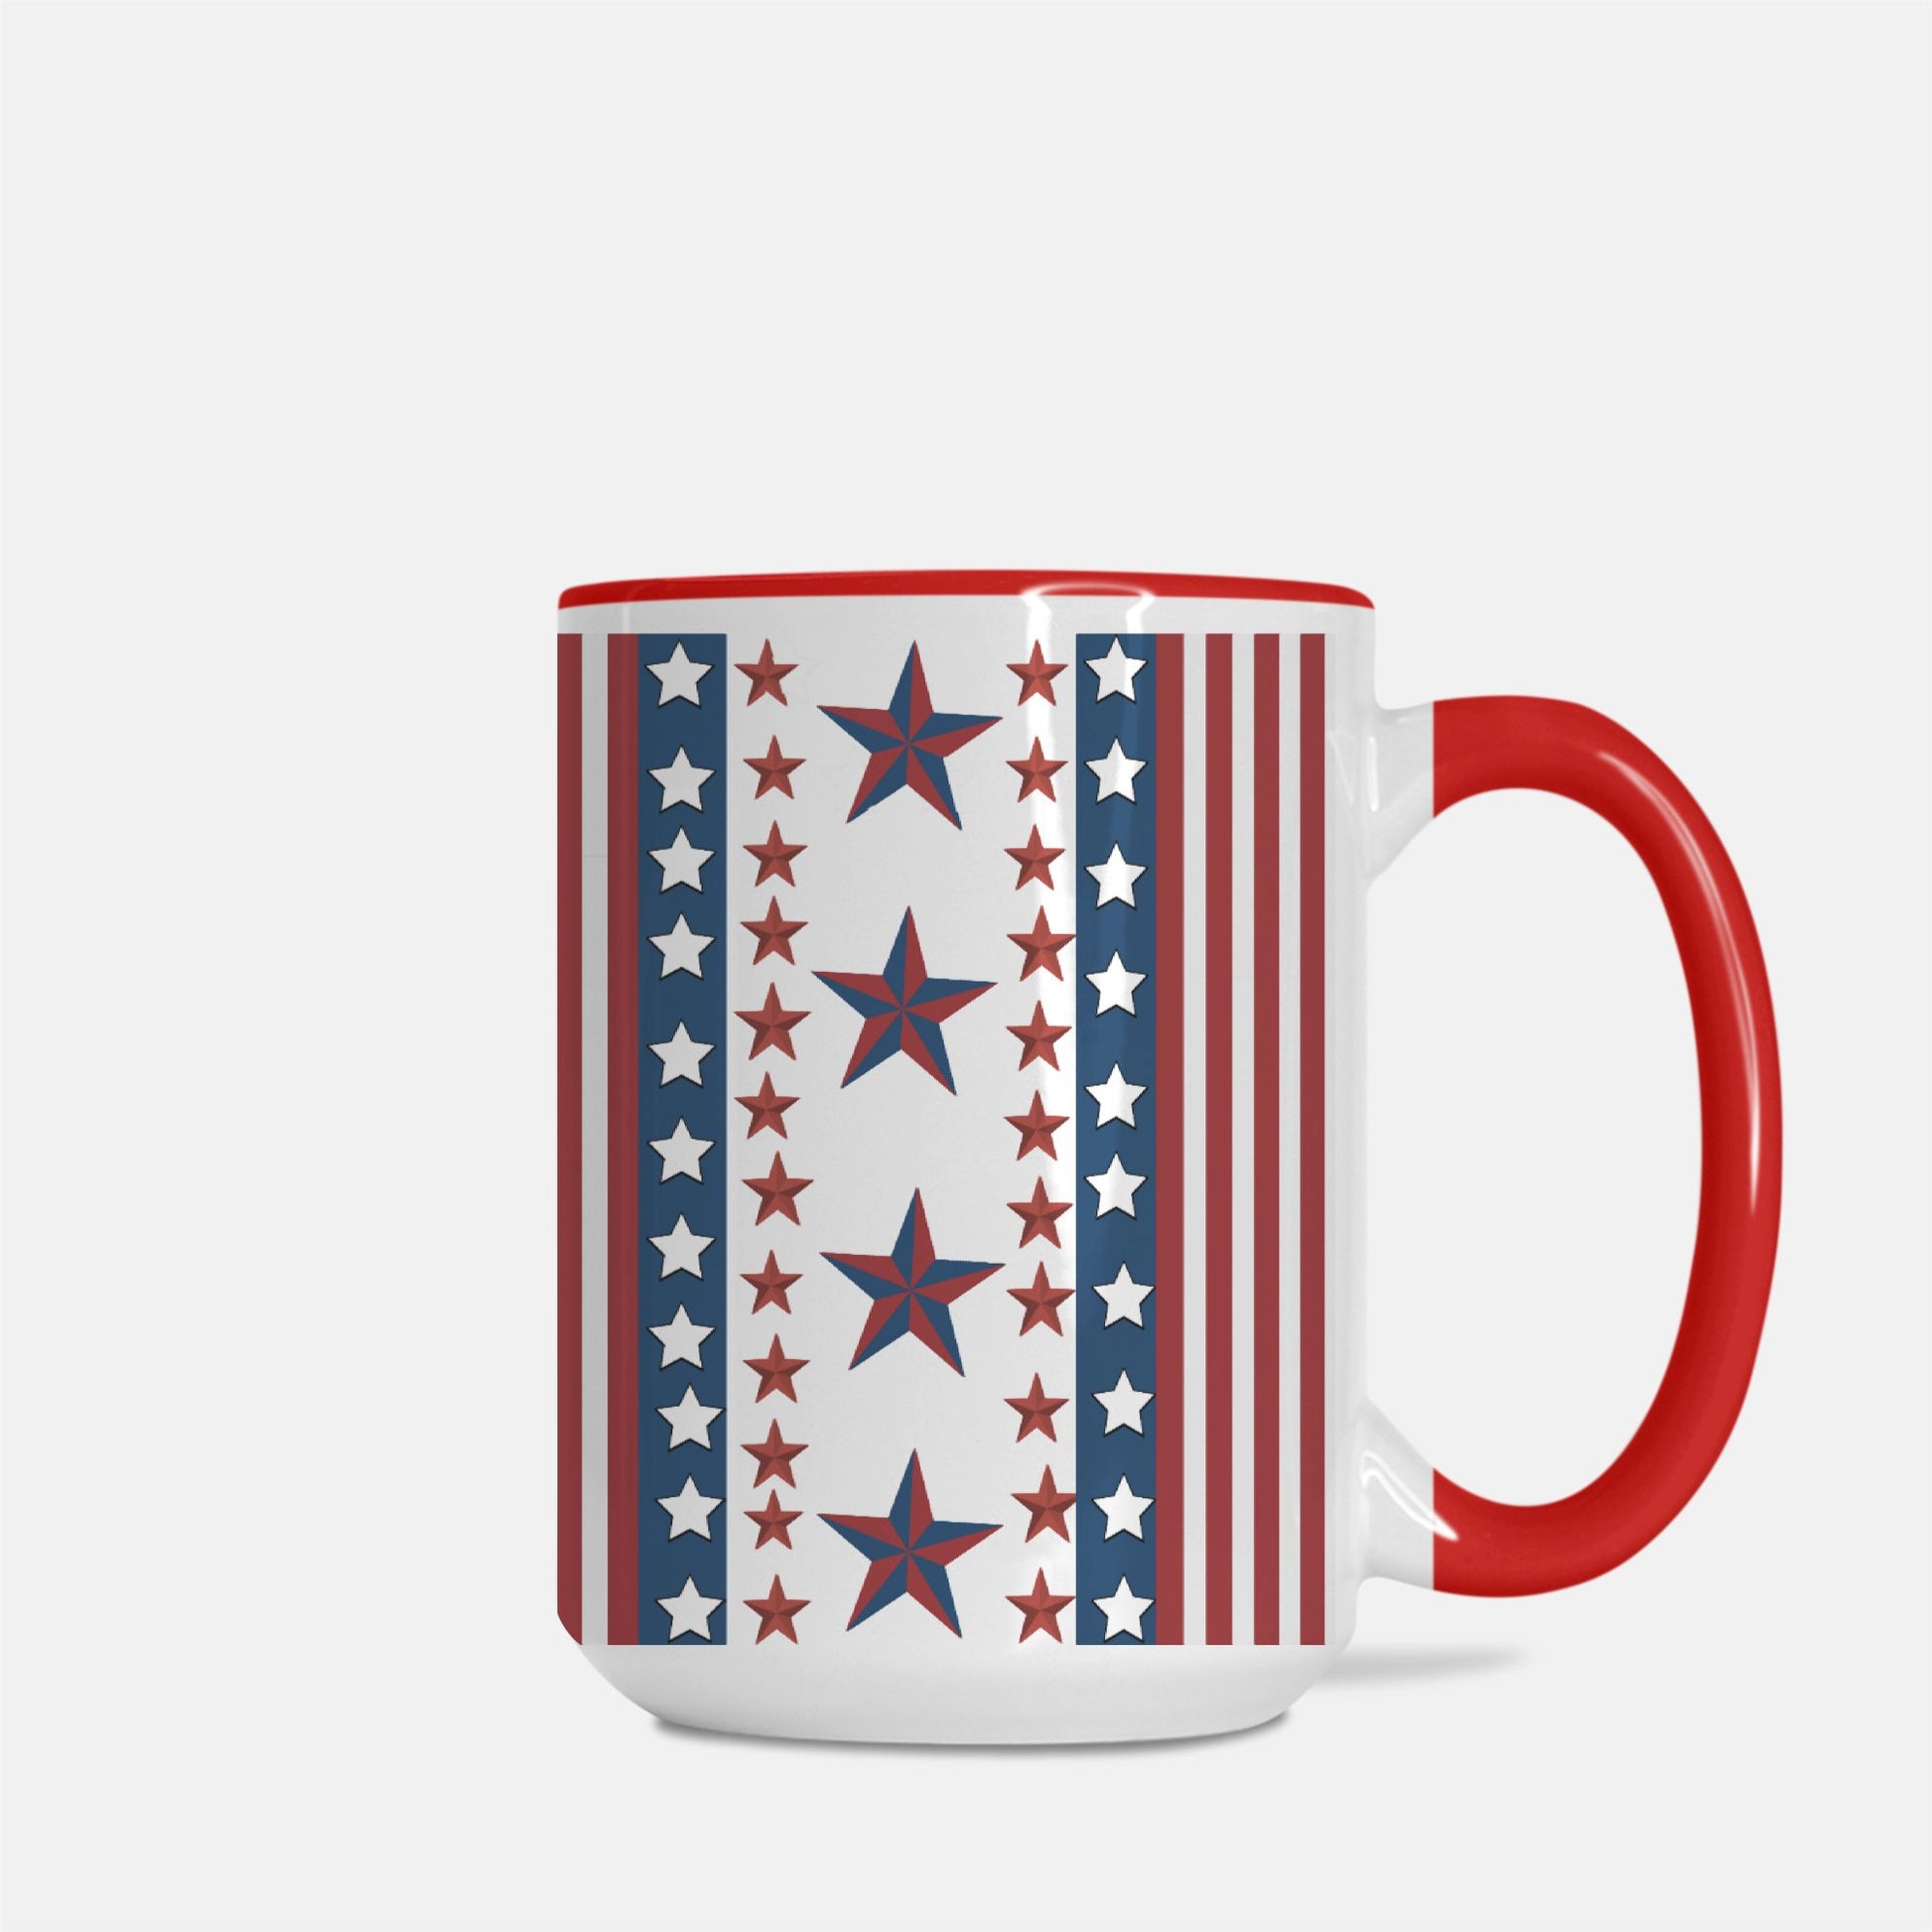 4th of july coffee mug with red, white and blue stars and stipes